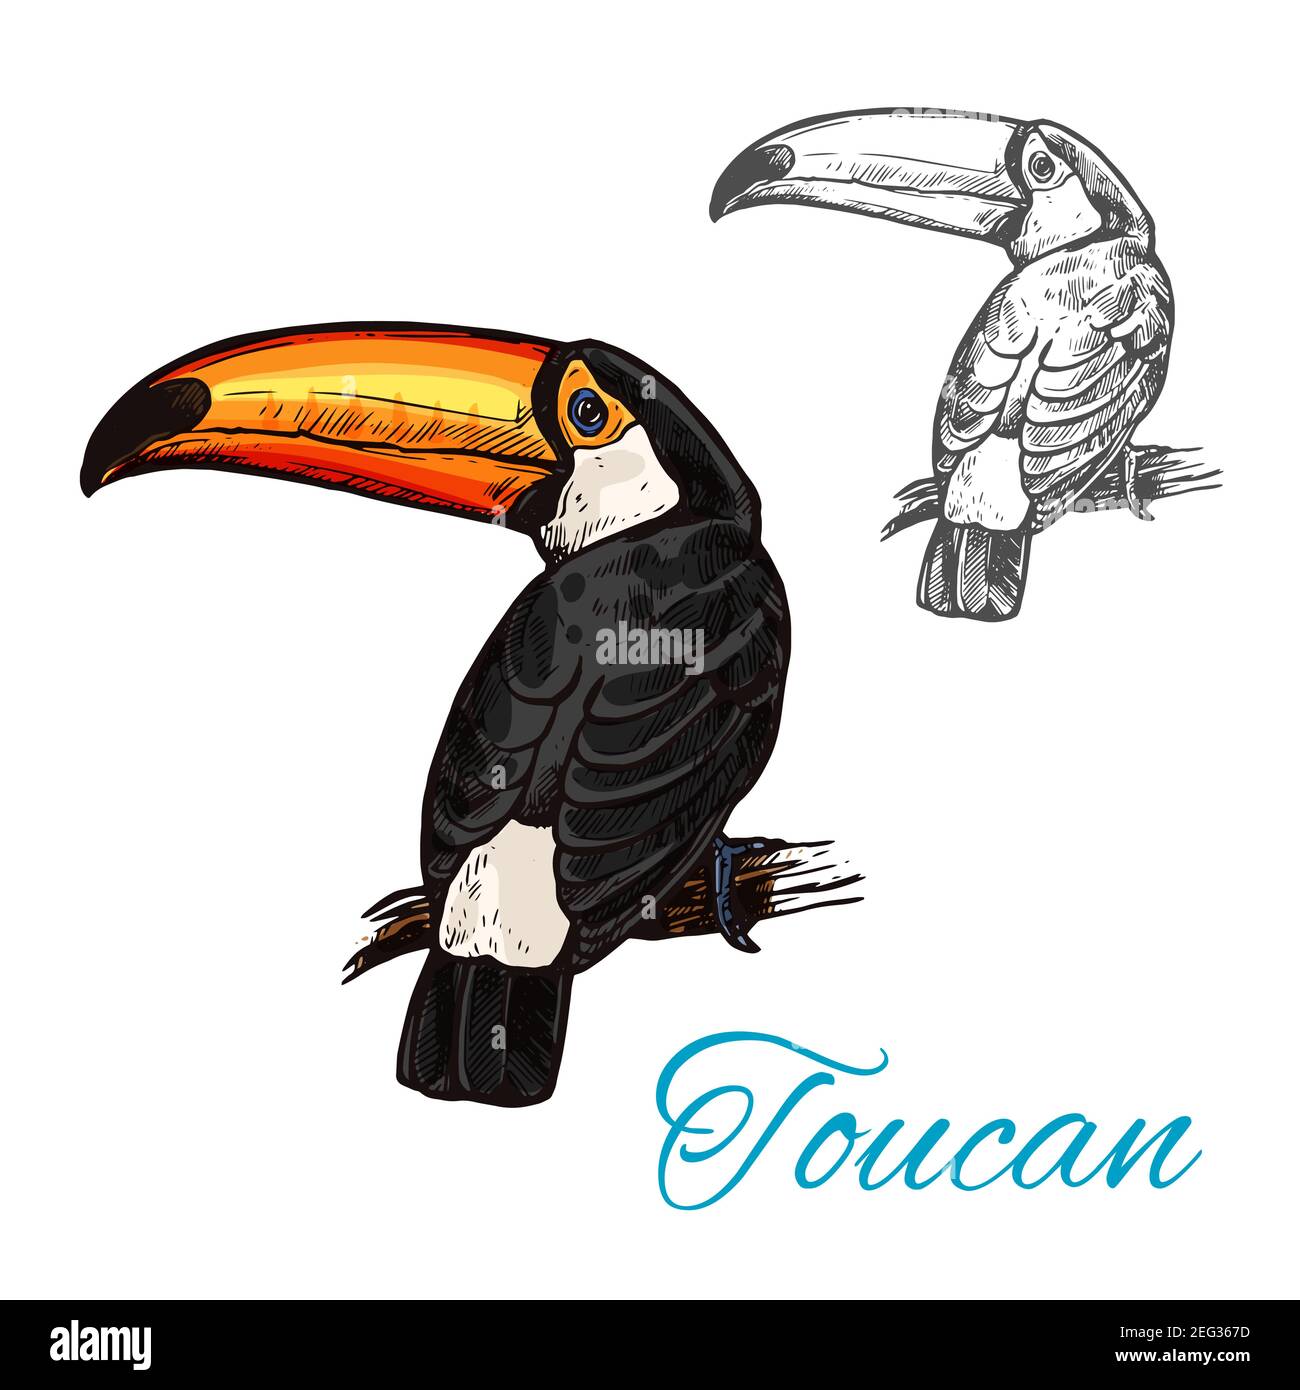 Toucan tropical bird sitting on branch sketch. South american exotic toco toucan with bright feathers and beak isolated icon for zoo mascot or tropica Stock Vector